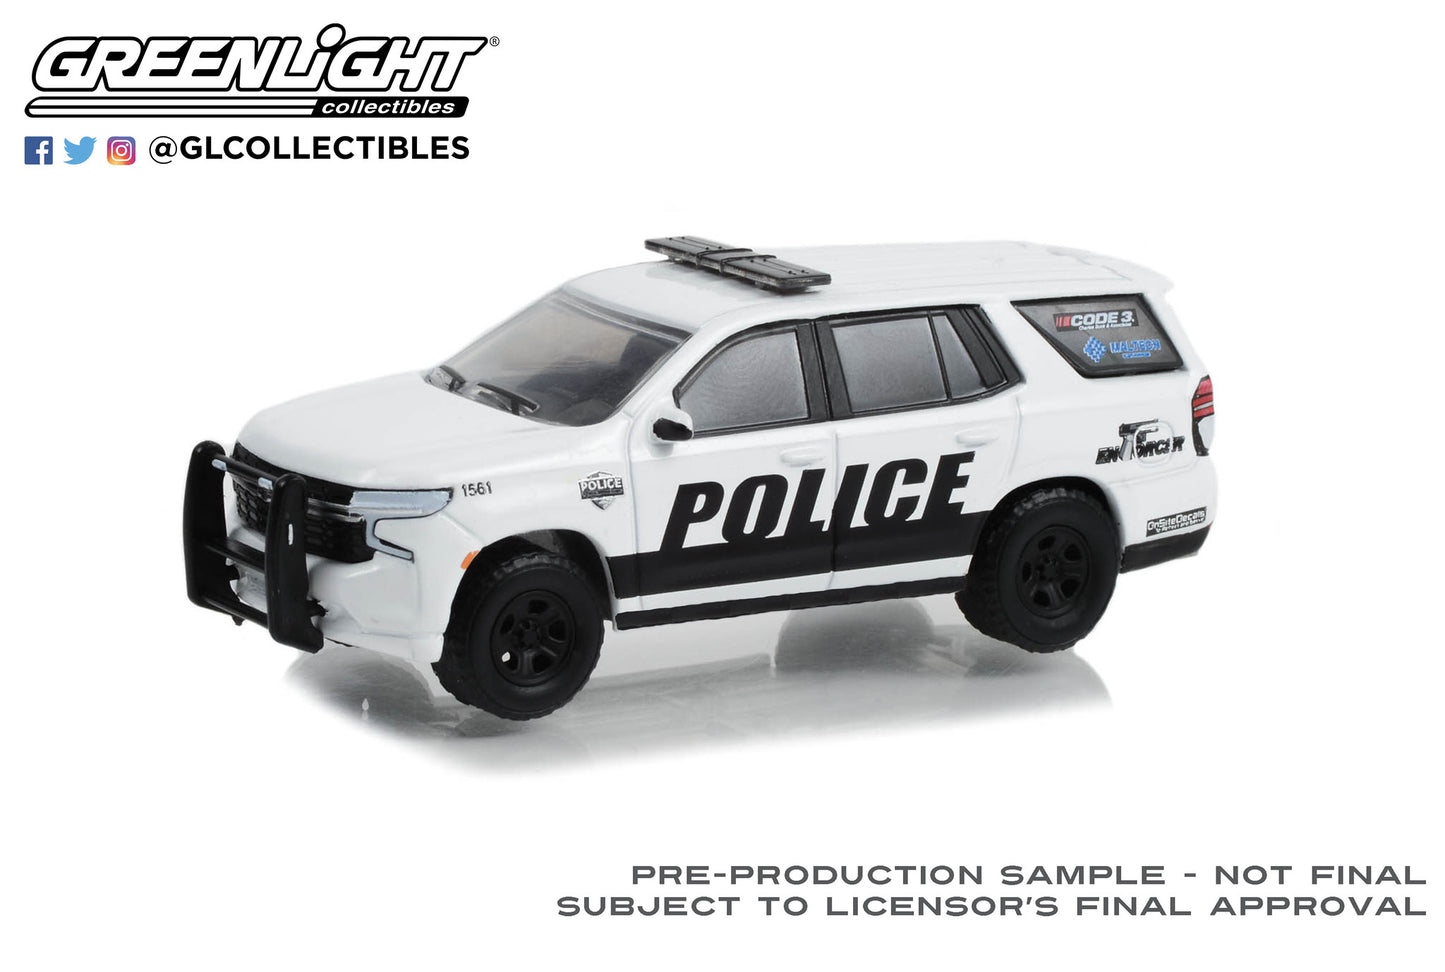 GreenLight 1:64 Hot Pursuit - 2021 Chevrolet Tahoe Police Pursuit Vehicle (PPV) - General Motors Fleet Police Show Vehicle - White and Black (Hobby Exclusive) 30356